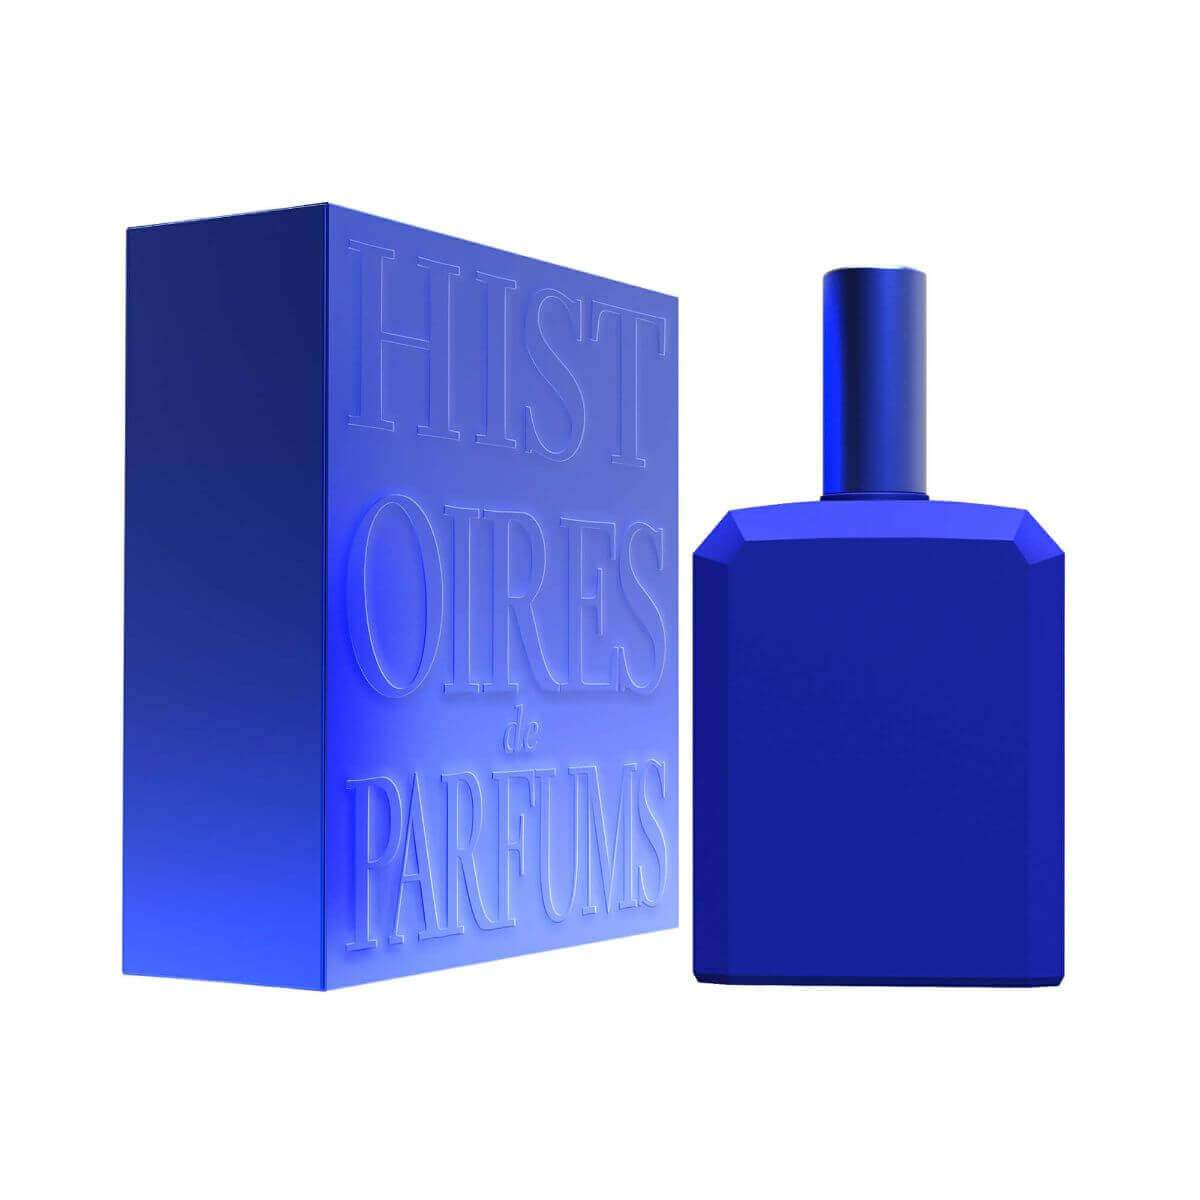 Histoires De Parfum - This Is Not A Blue Bottle 1.1, A Fragrance Of Abstraction For Women And Menan Irresistible, Hypnotic Perfumethe Notes Of Attractive Patchouli, Electric Orange And Ethereal Musk Form A Fantasy ScentTop Notes:Orange, AldehydeHeart Notes:Honey, GeraniumBase Notes: Patchouli, Amber, Musk.